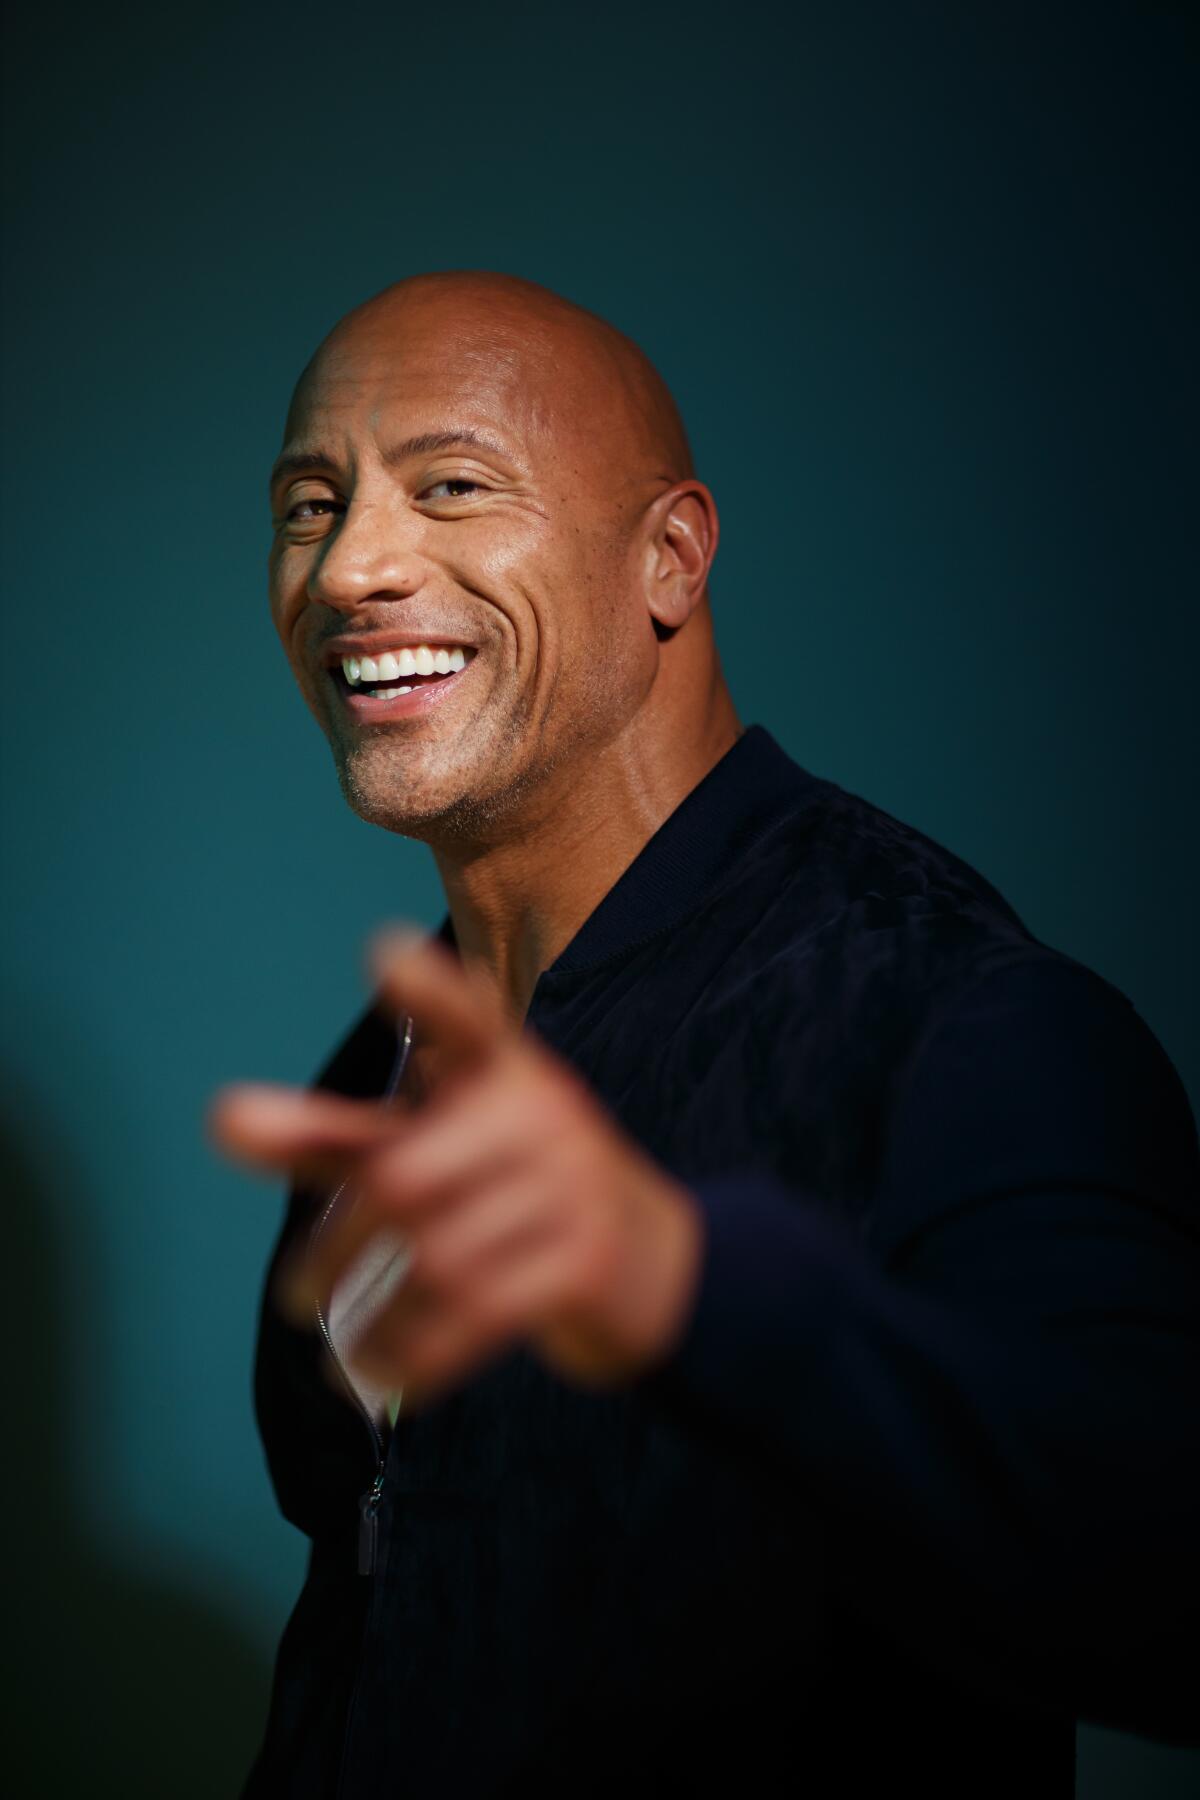 The Rock Opens Up About Past Mental Health Struggles